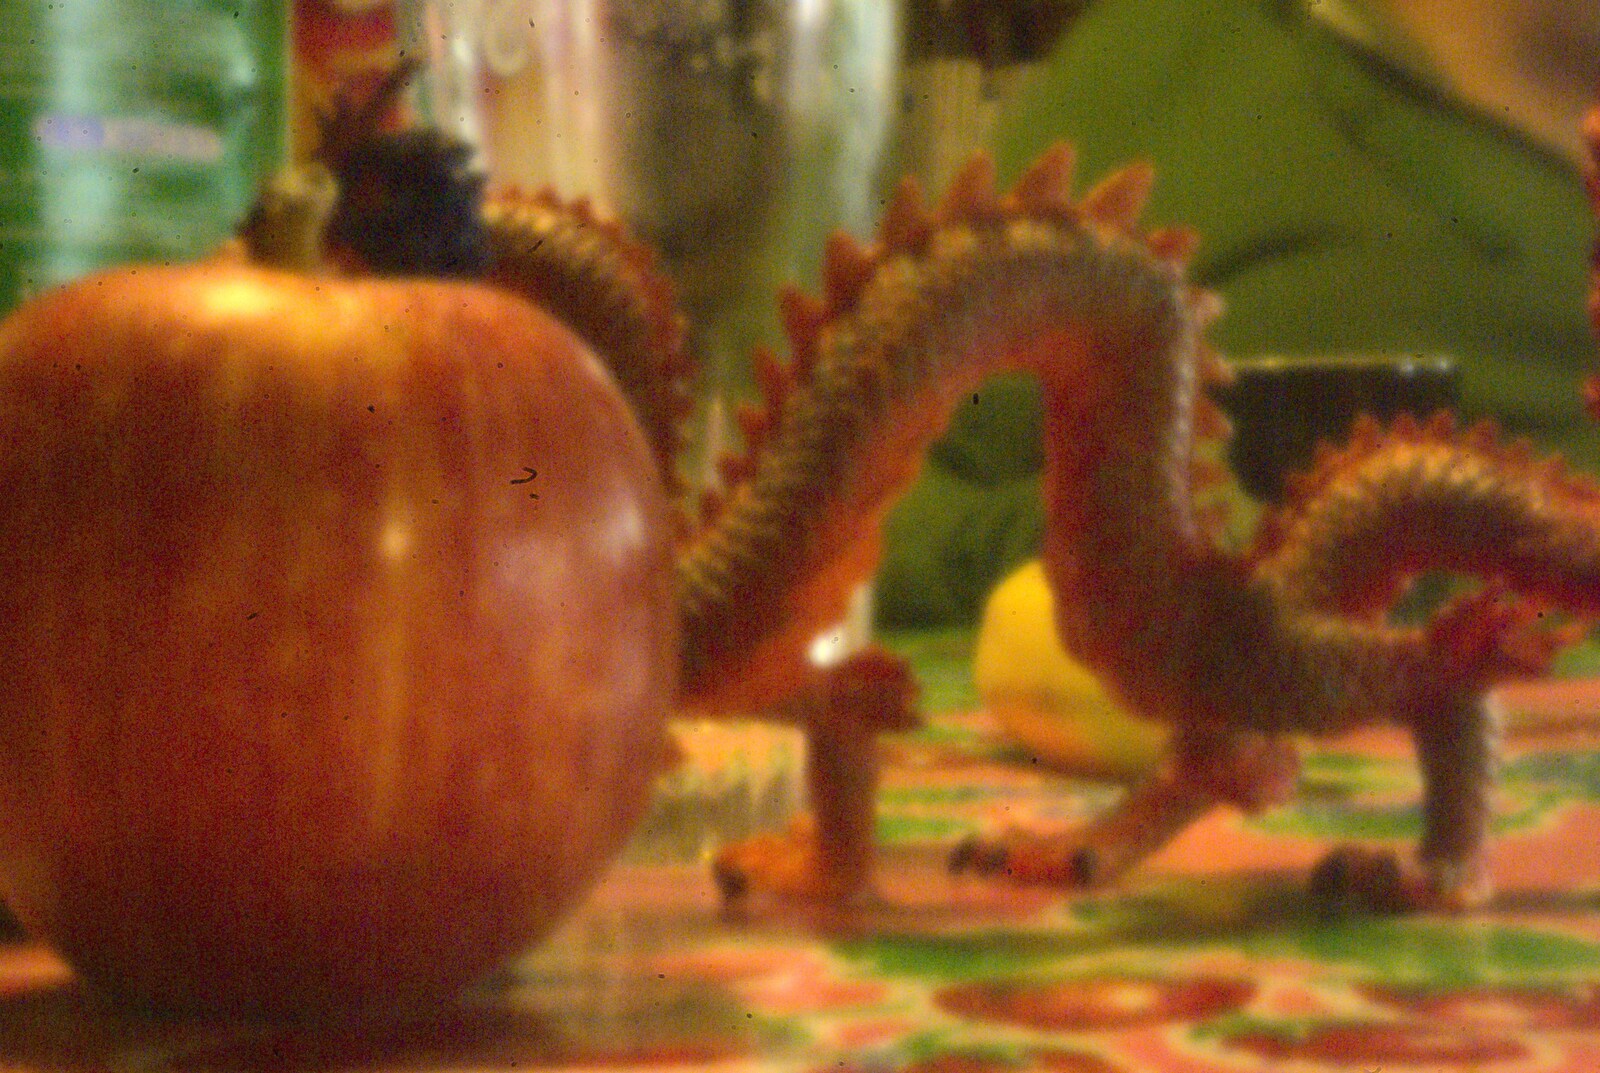 A pinhole camera shot of an apple and a Chinese dragon from A Day Trip to Brussels, Belgium - 5th April 2009